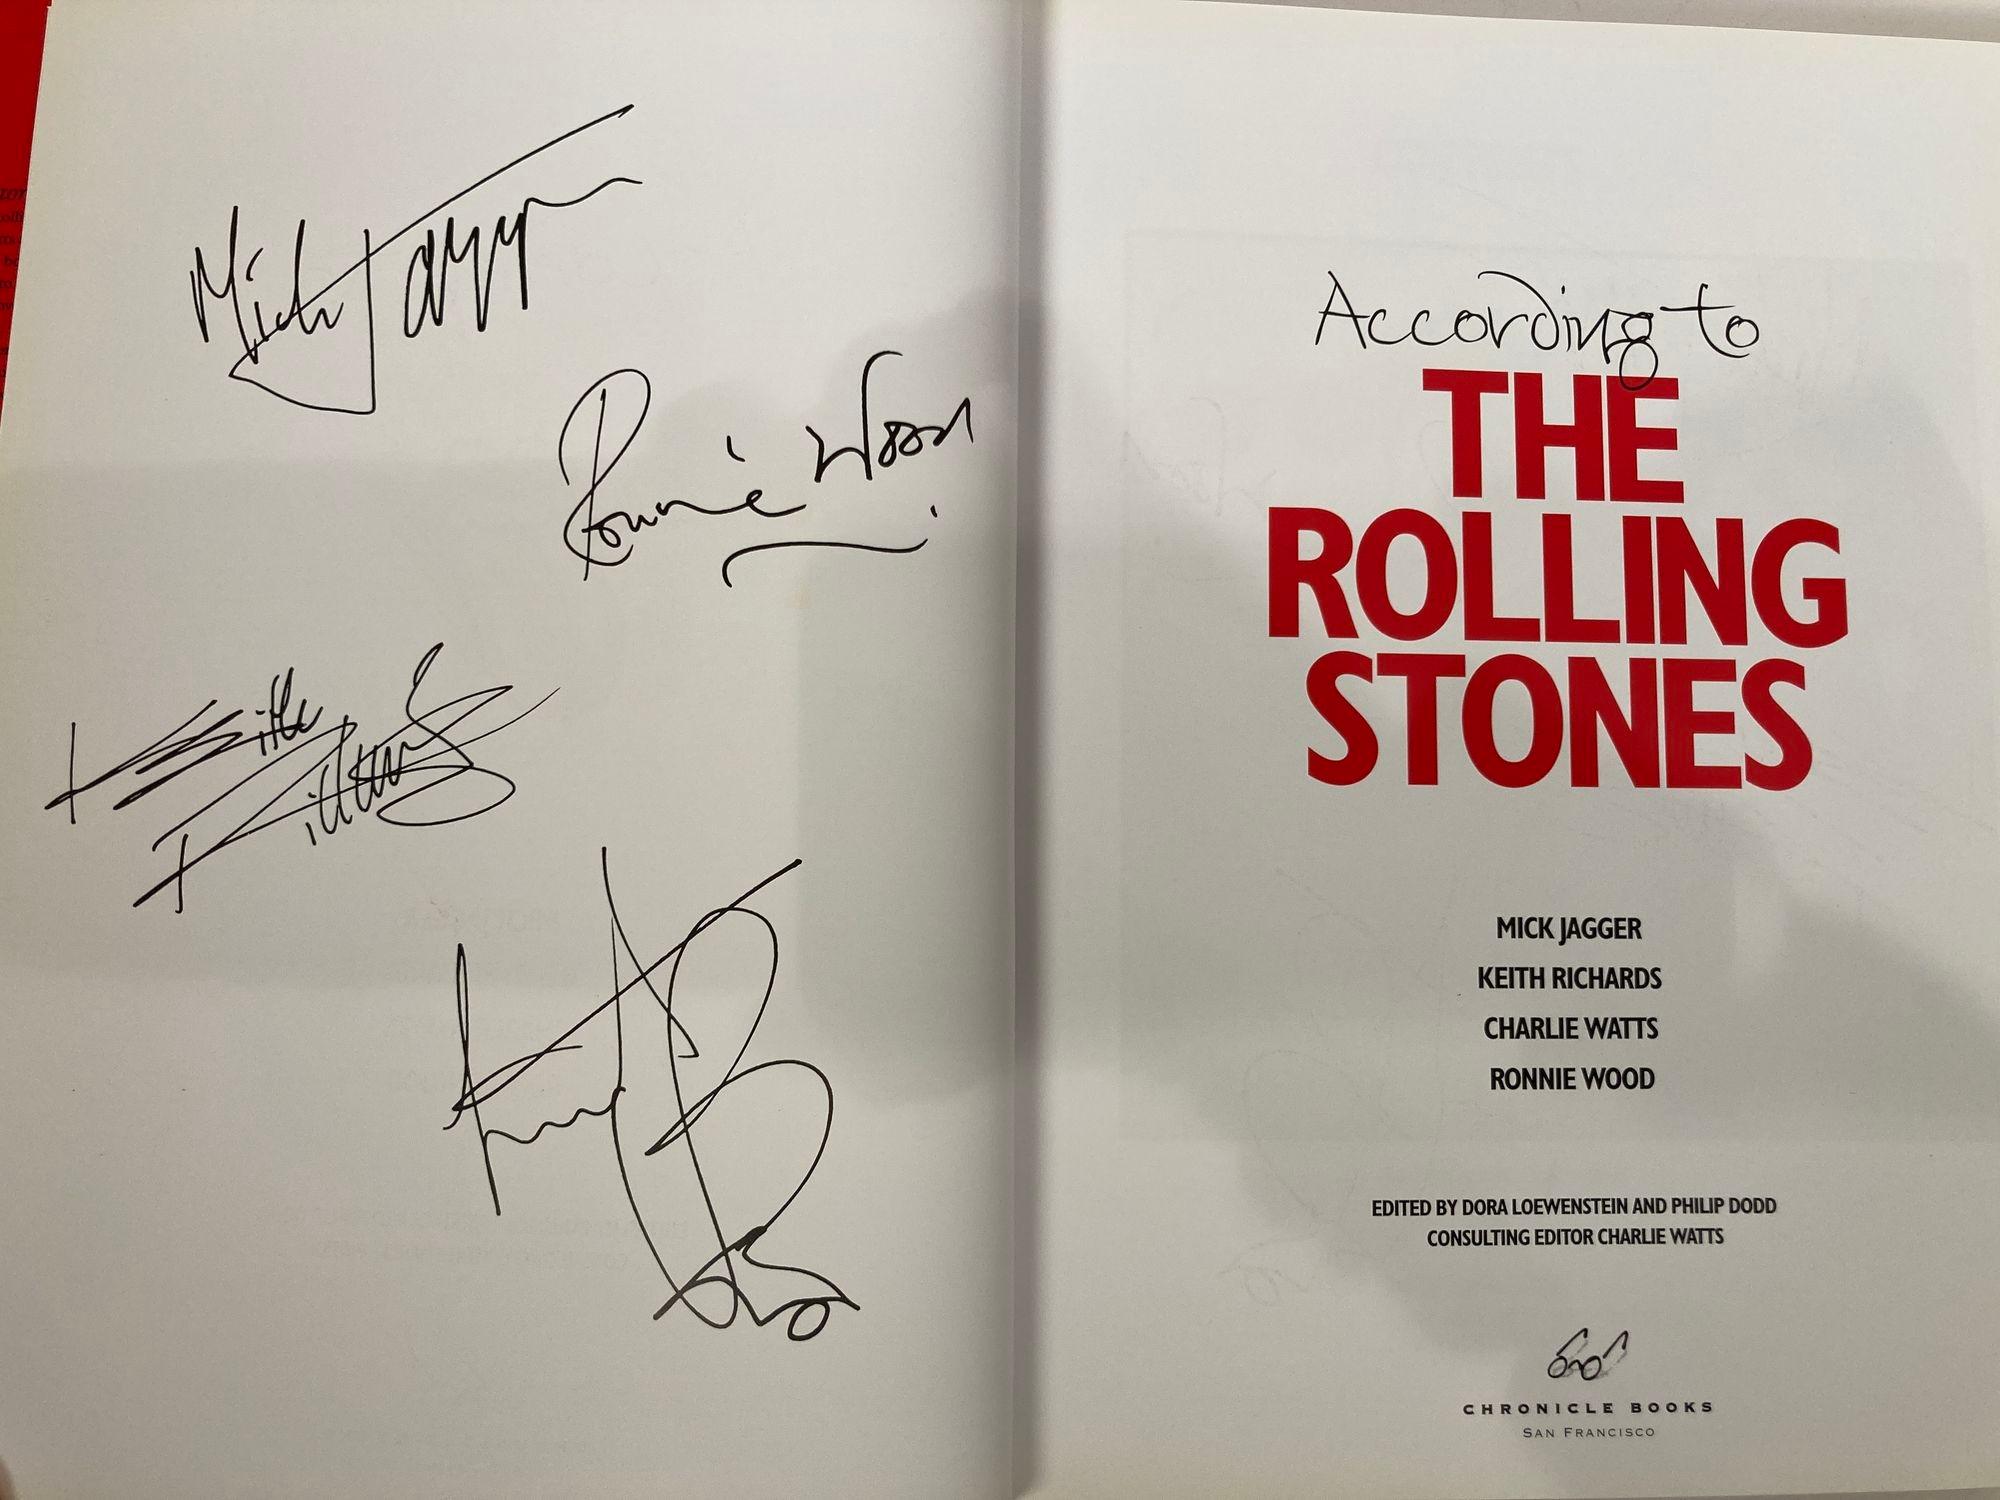 According to The Rolling Stones Hardcover Table Book For Sale 4